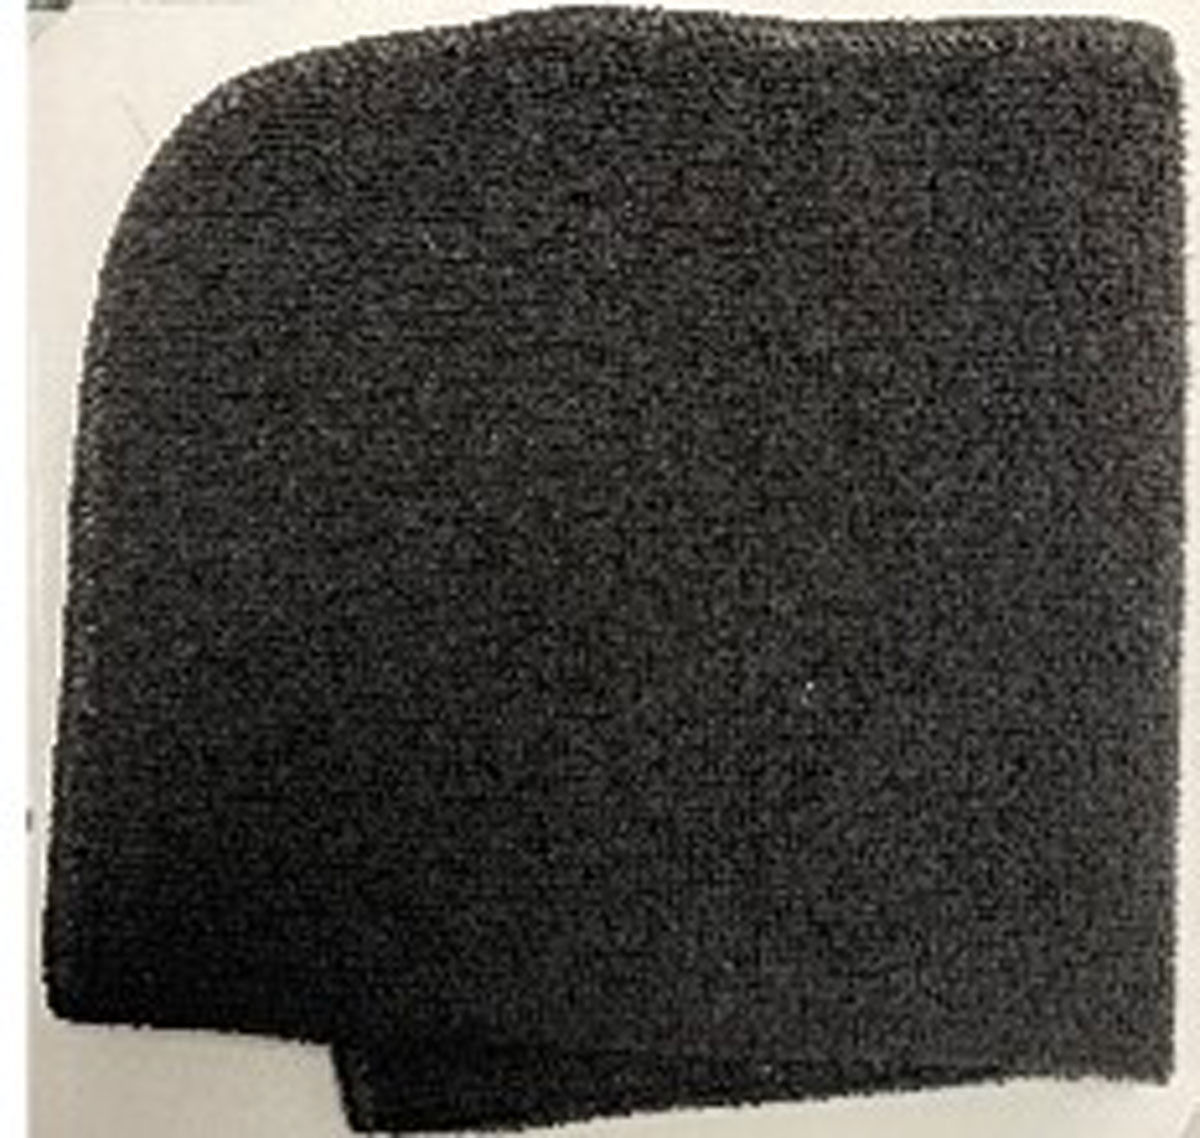 Do these black microfiber towels have rounded corners?